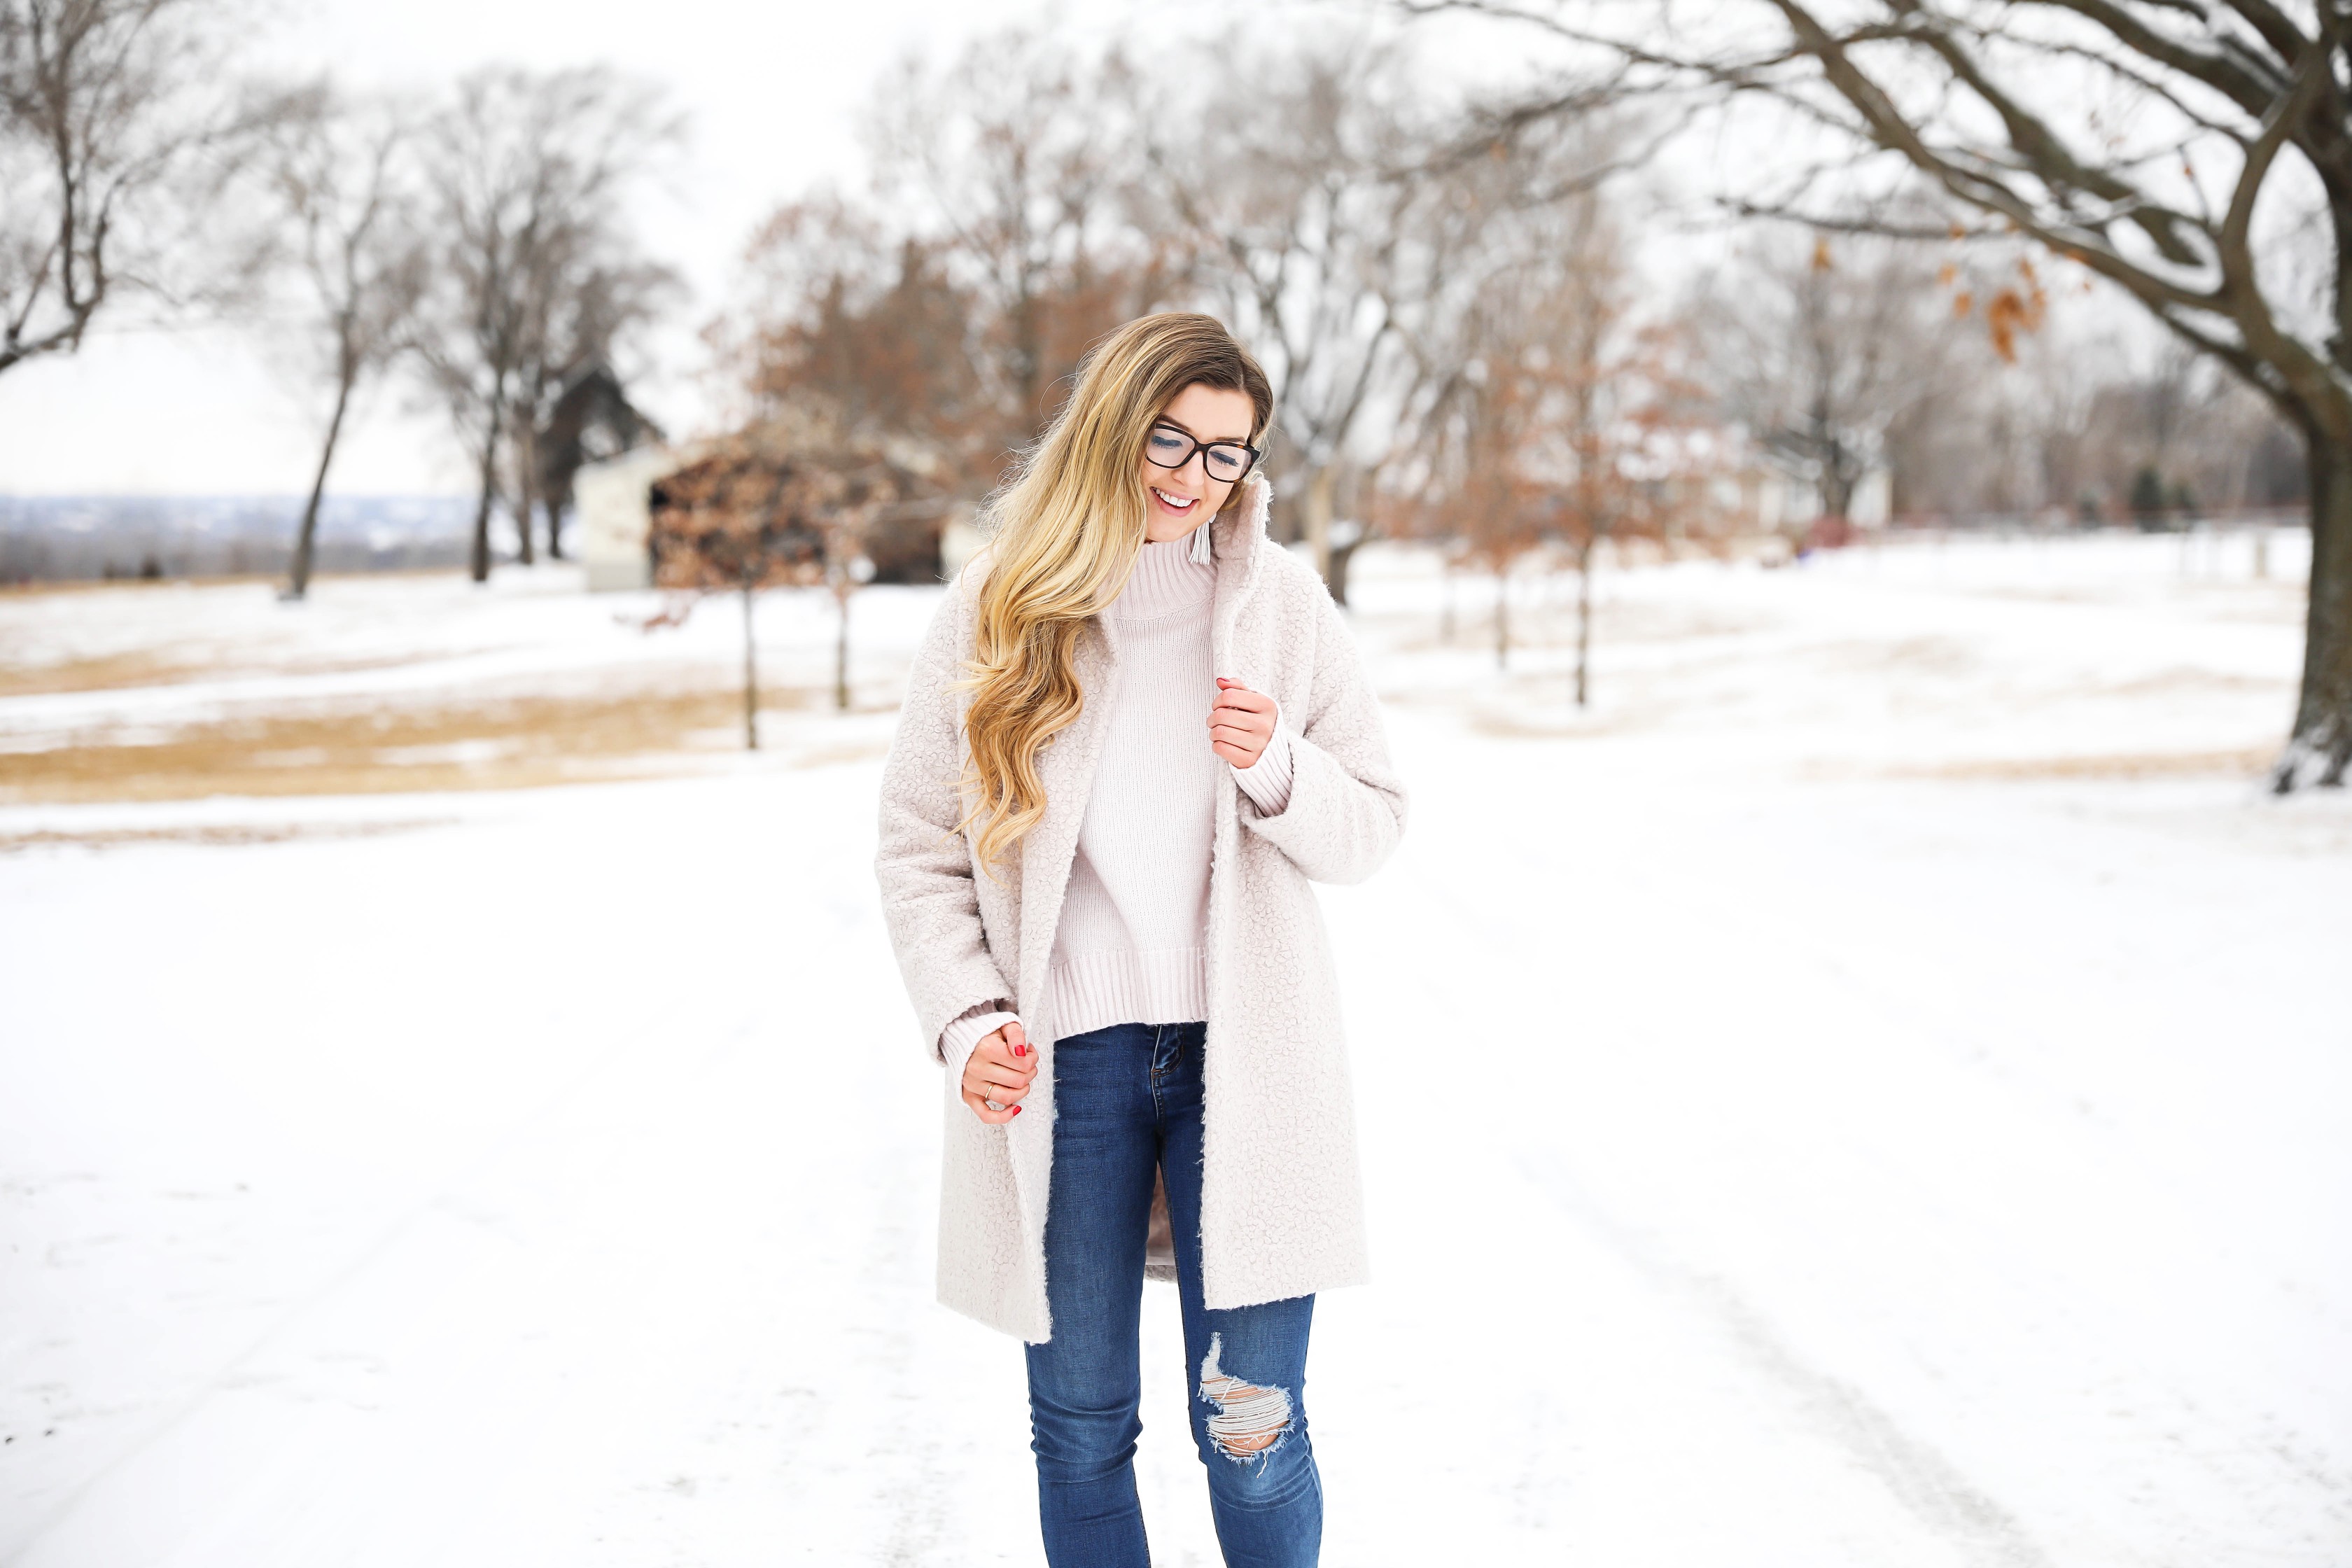 Nice winter coat! Winter coat roundup on the blog! I love this pink coat, it is sort of off white looking! Details on fashion blog daily dose of charm by lauren lindmark